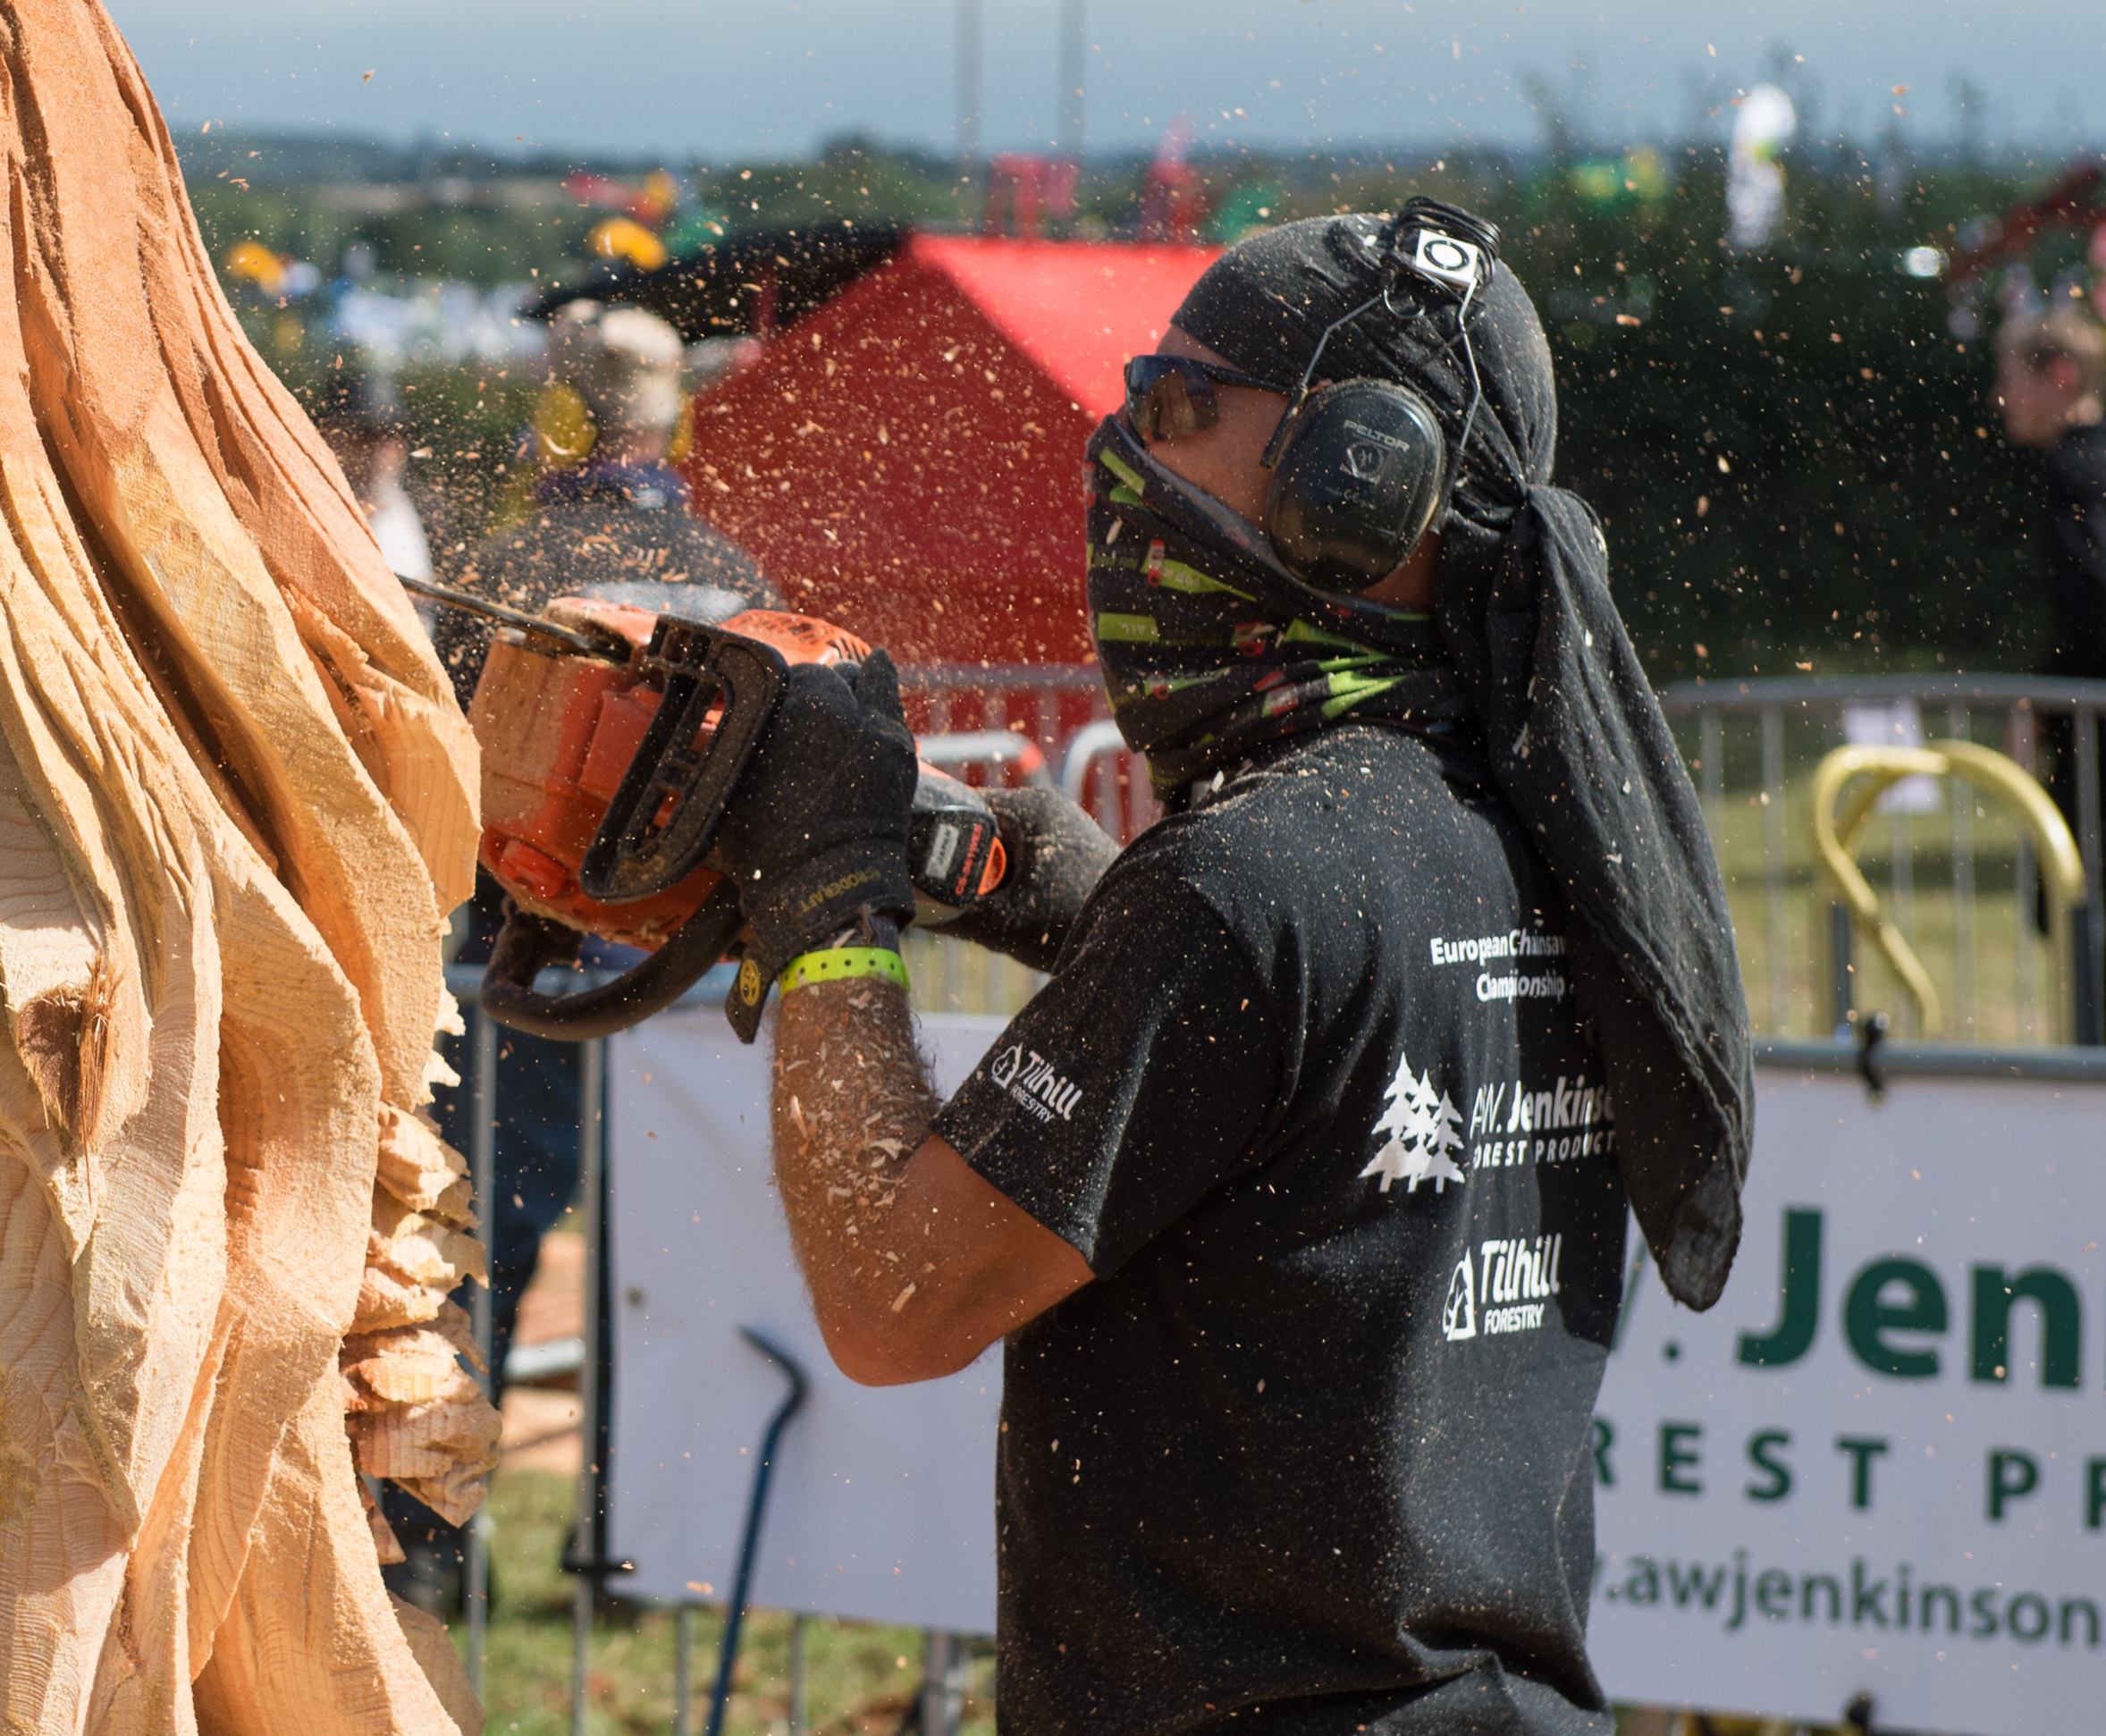 Individual doing chainsaw carving